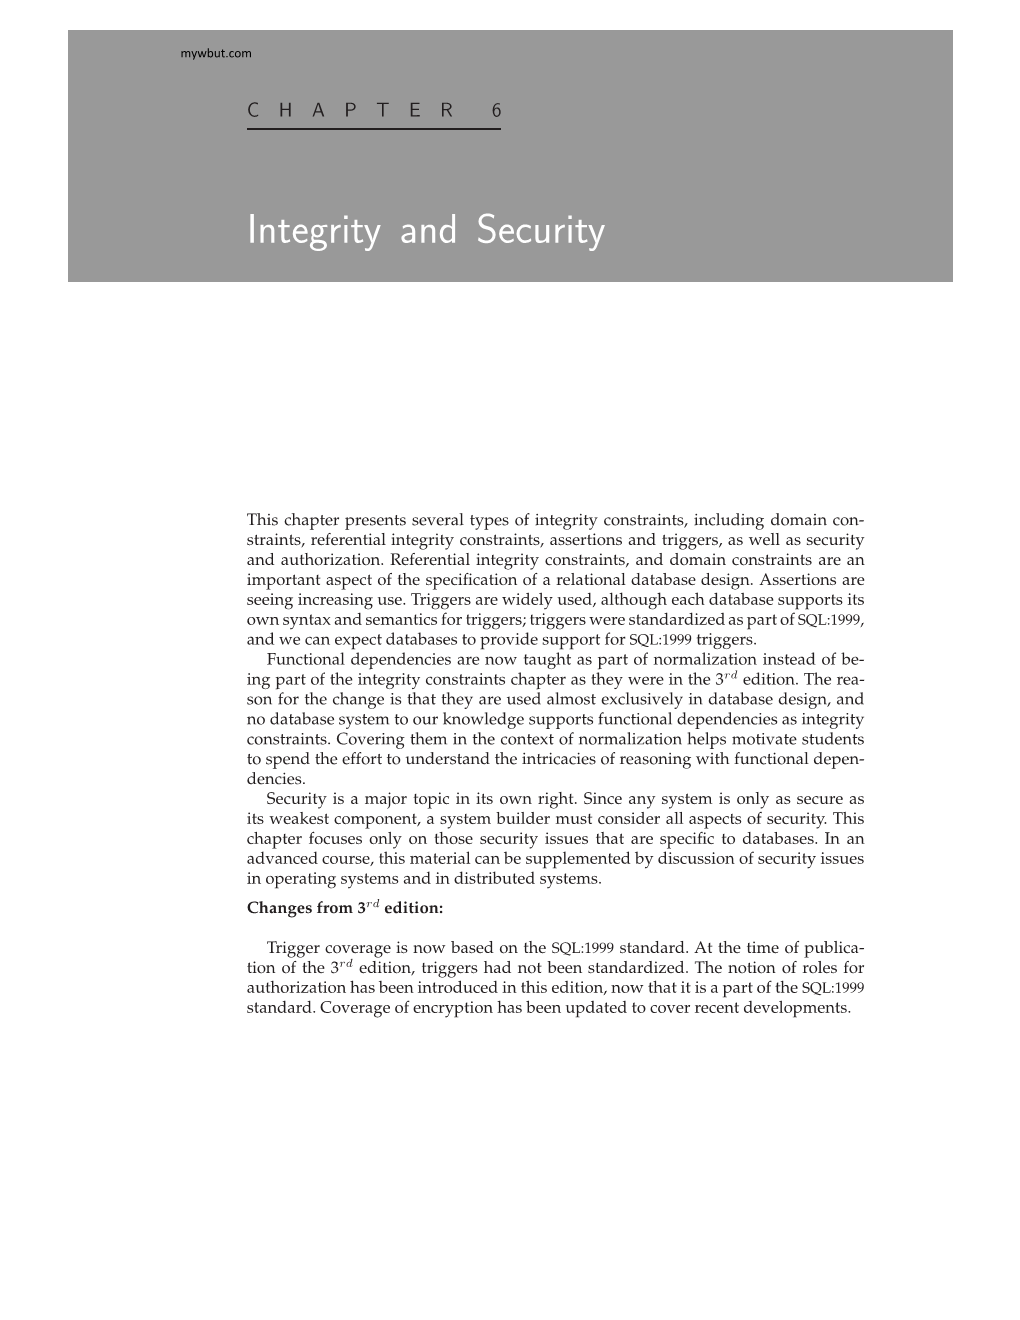 Integrity and Security